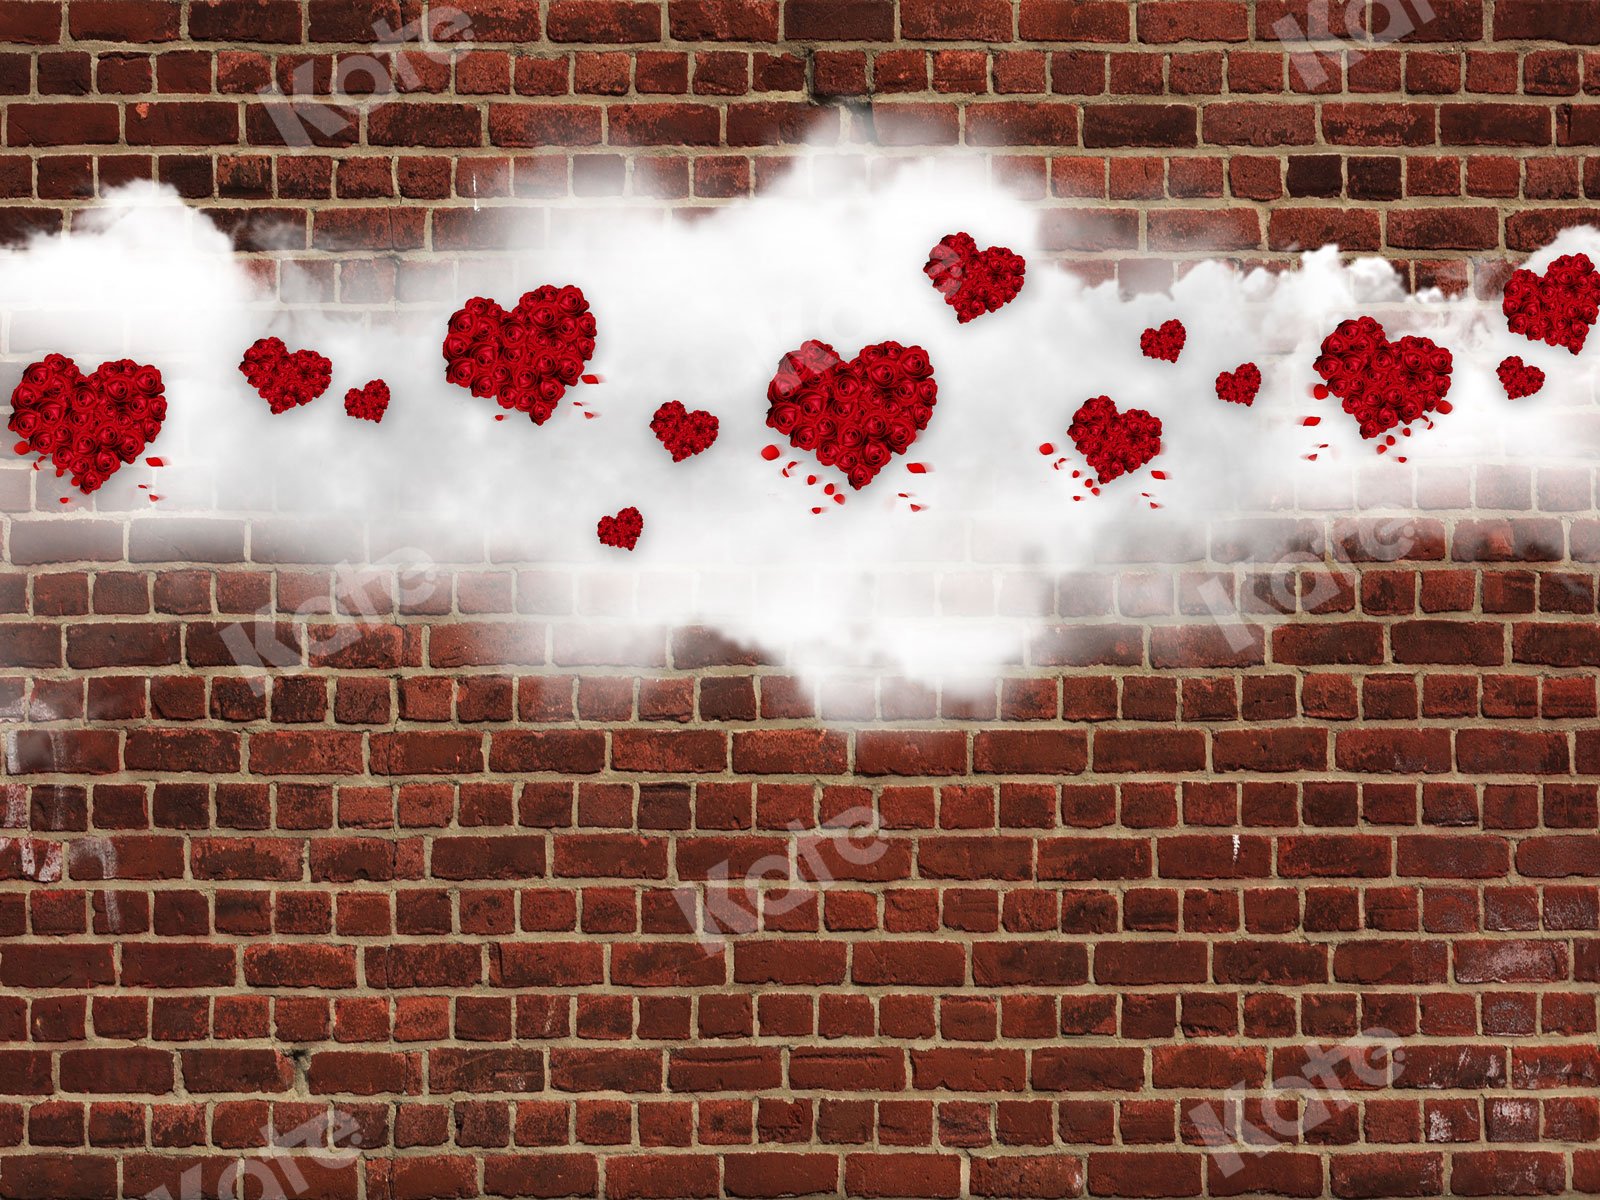 Kate Valentine's Day Brick Wall Backdrop for Photography